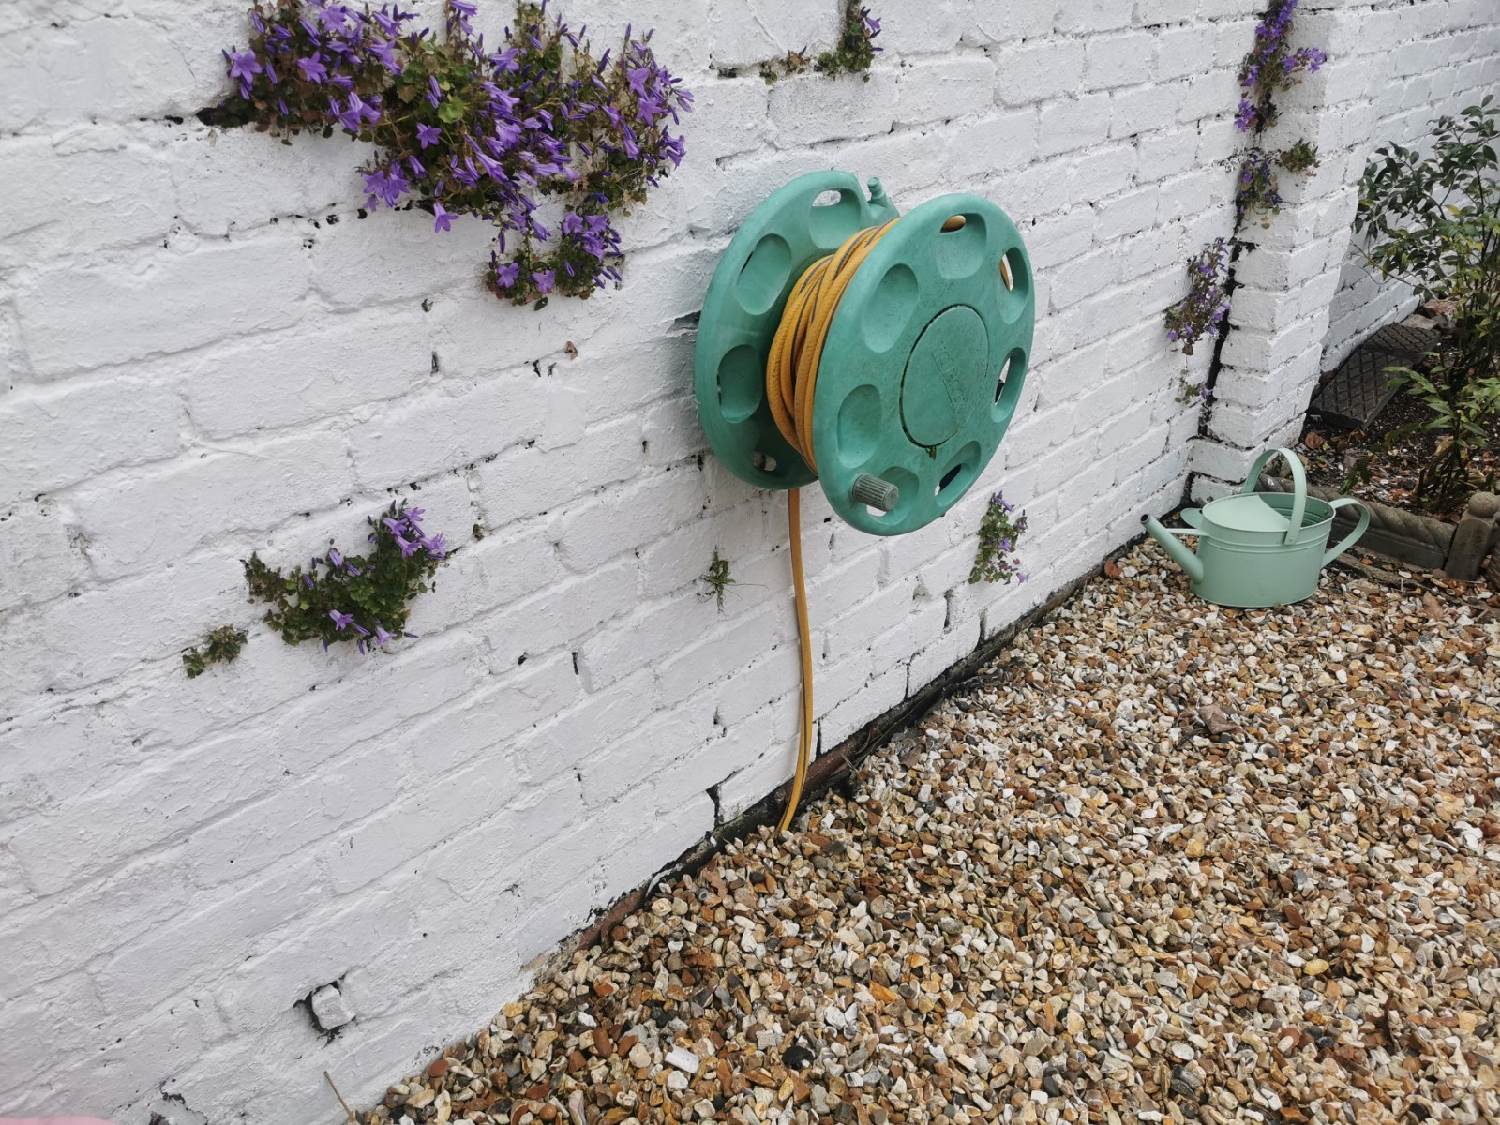 Pilton House Gower has a hosepipe should any pets or any person need a hose-down!